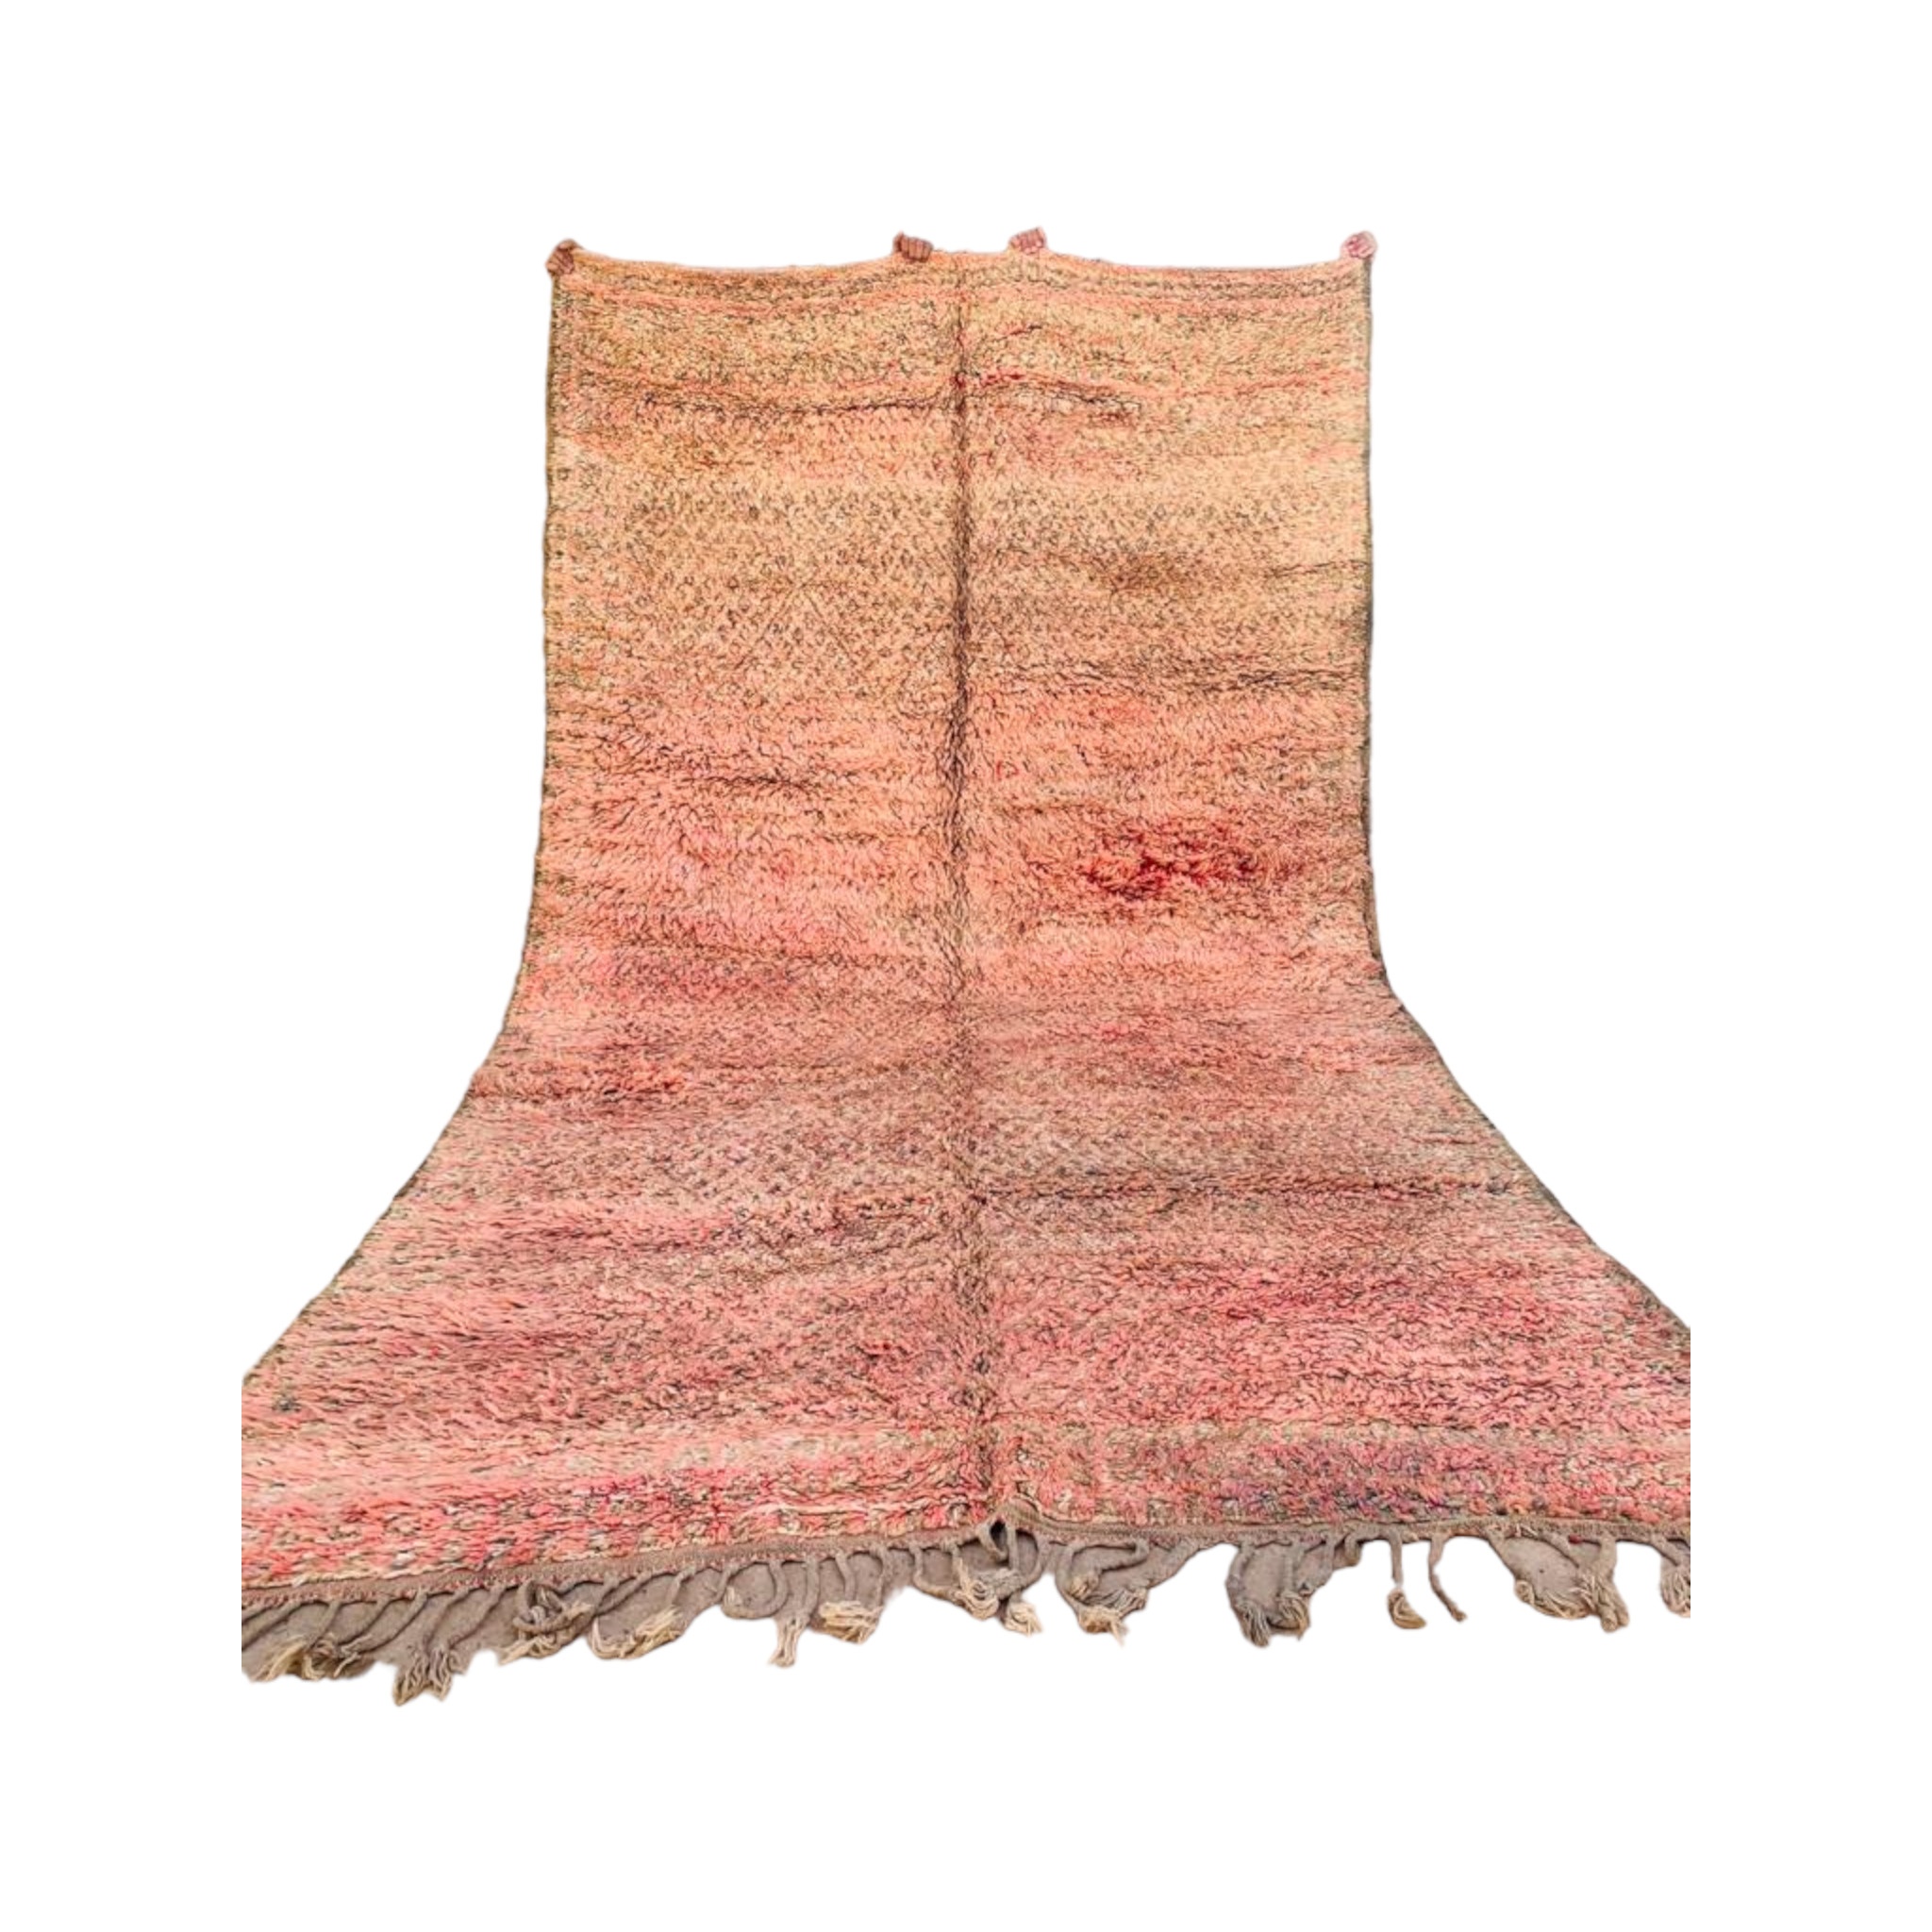 Faded pink moroccan wool rug